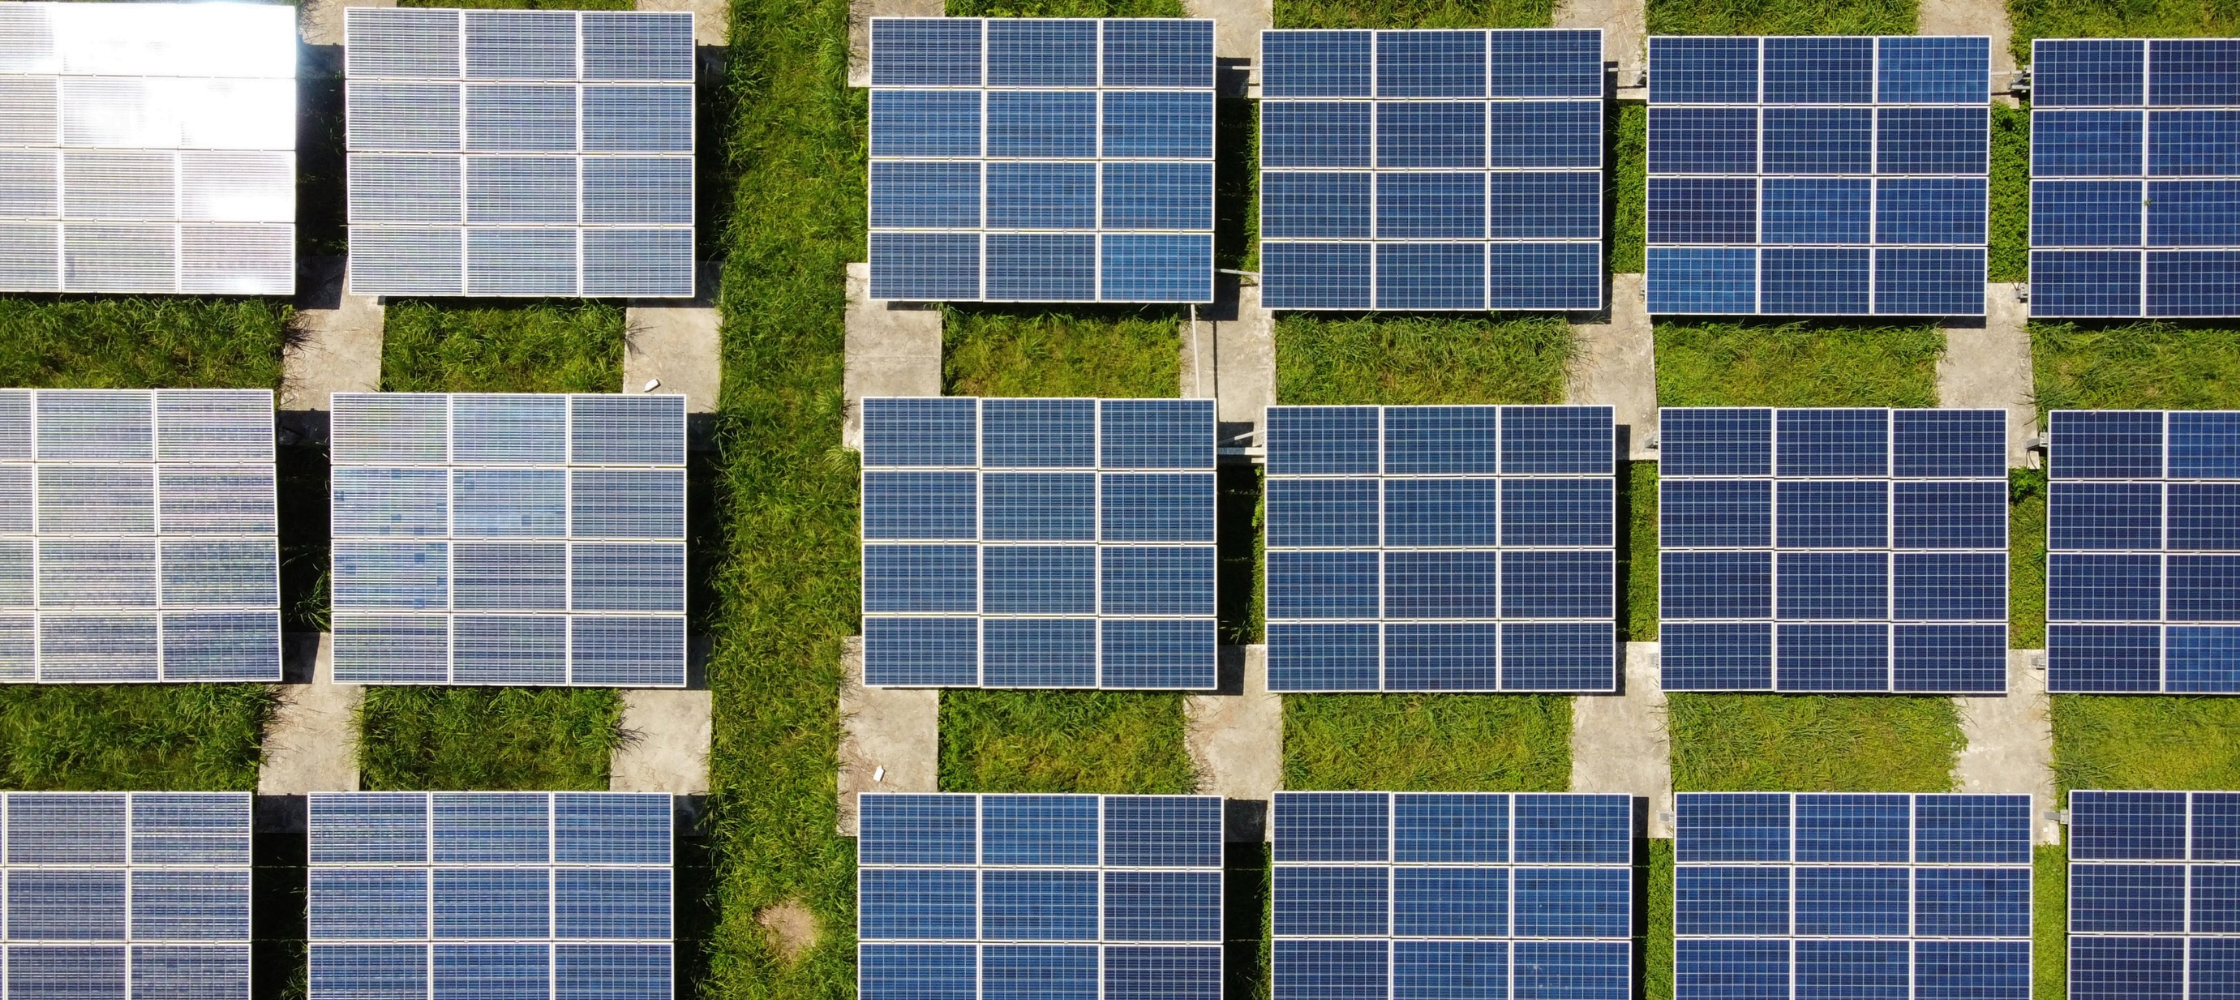 Picture of solar panels from above to represent climate change and the need for business sustainability